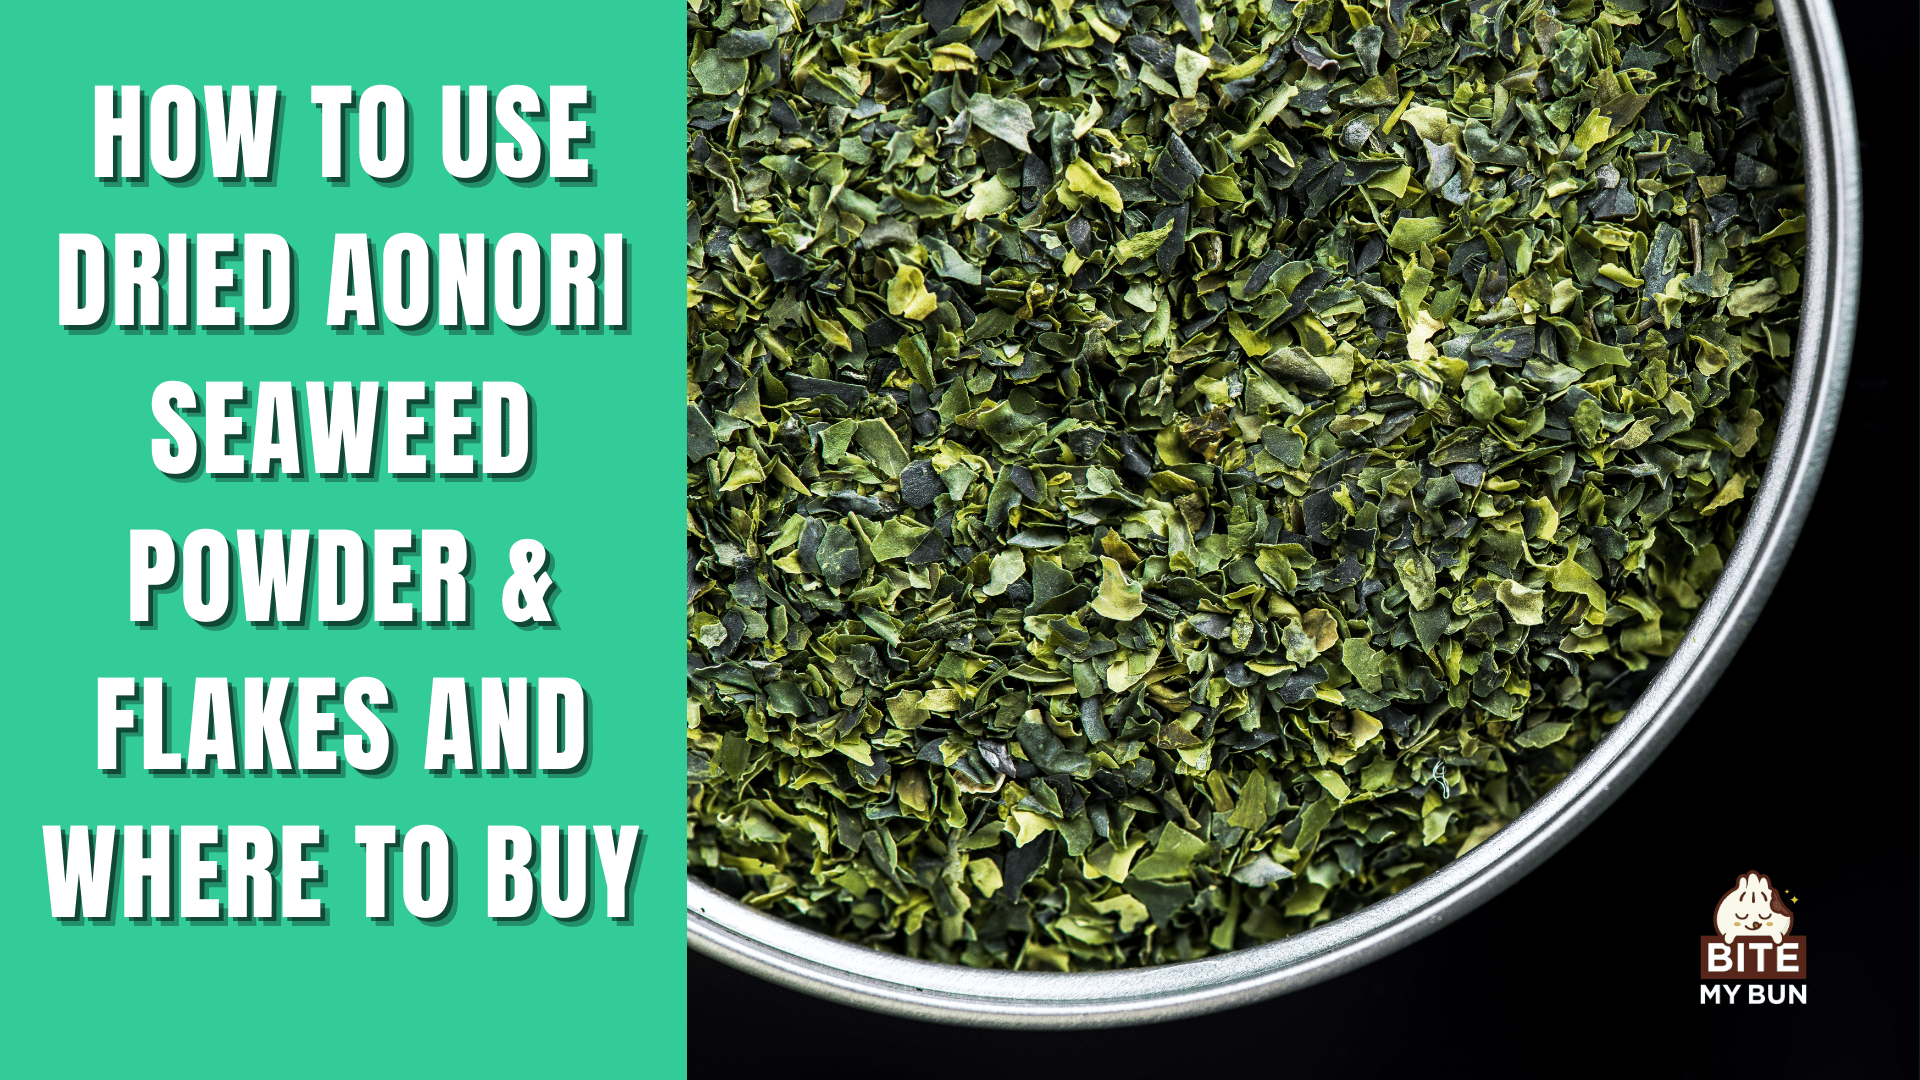 How to use dried aonori seaweed powder & flakes and where to buy